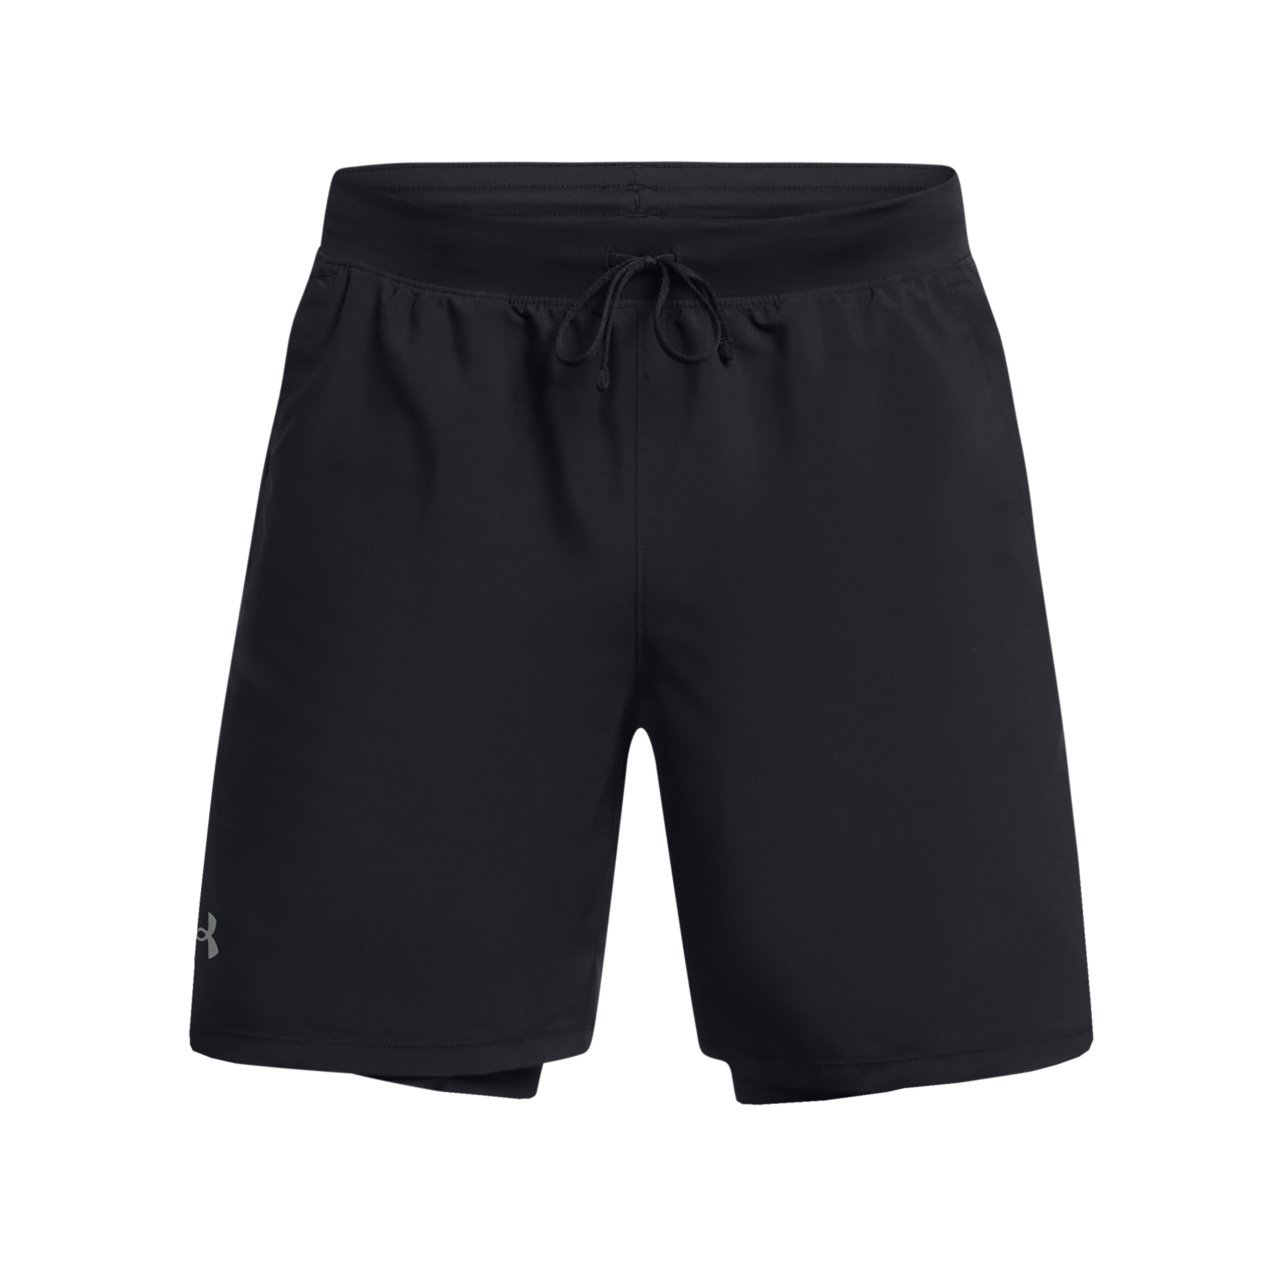 9: Under Armour Launch 7" 2-i-1 Shorts Herre